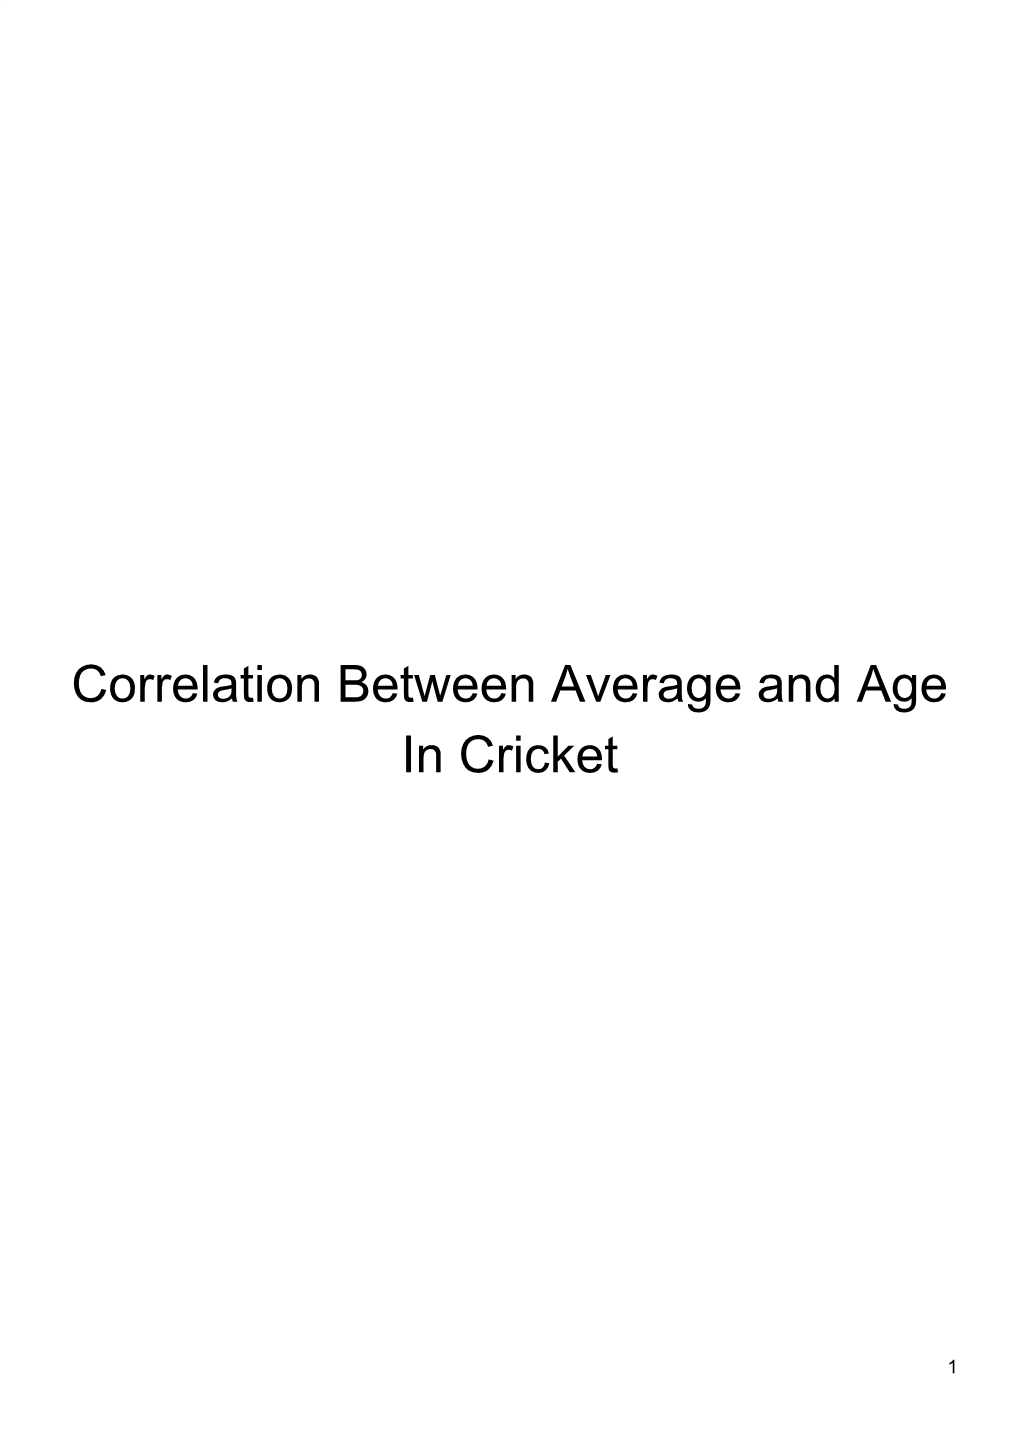 Correlation Between Average and Age in Cricket